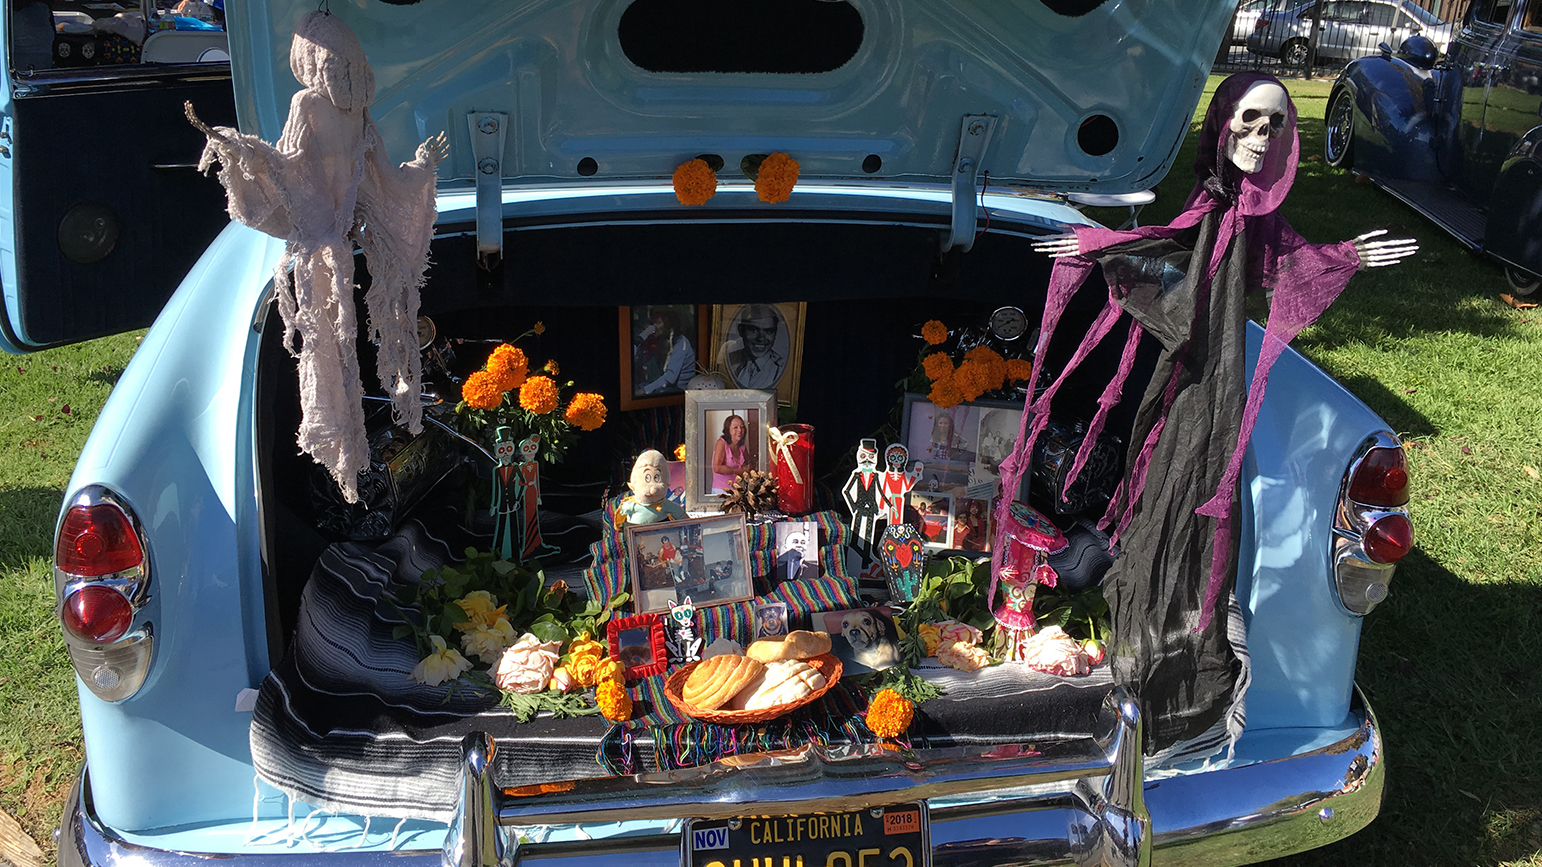 Photograph of an open truck of a car filled with photographs, flowers, two large skeletons, and other objects arranged neatly